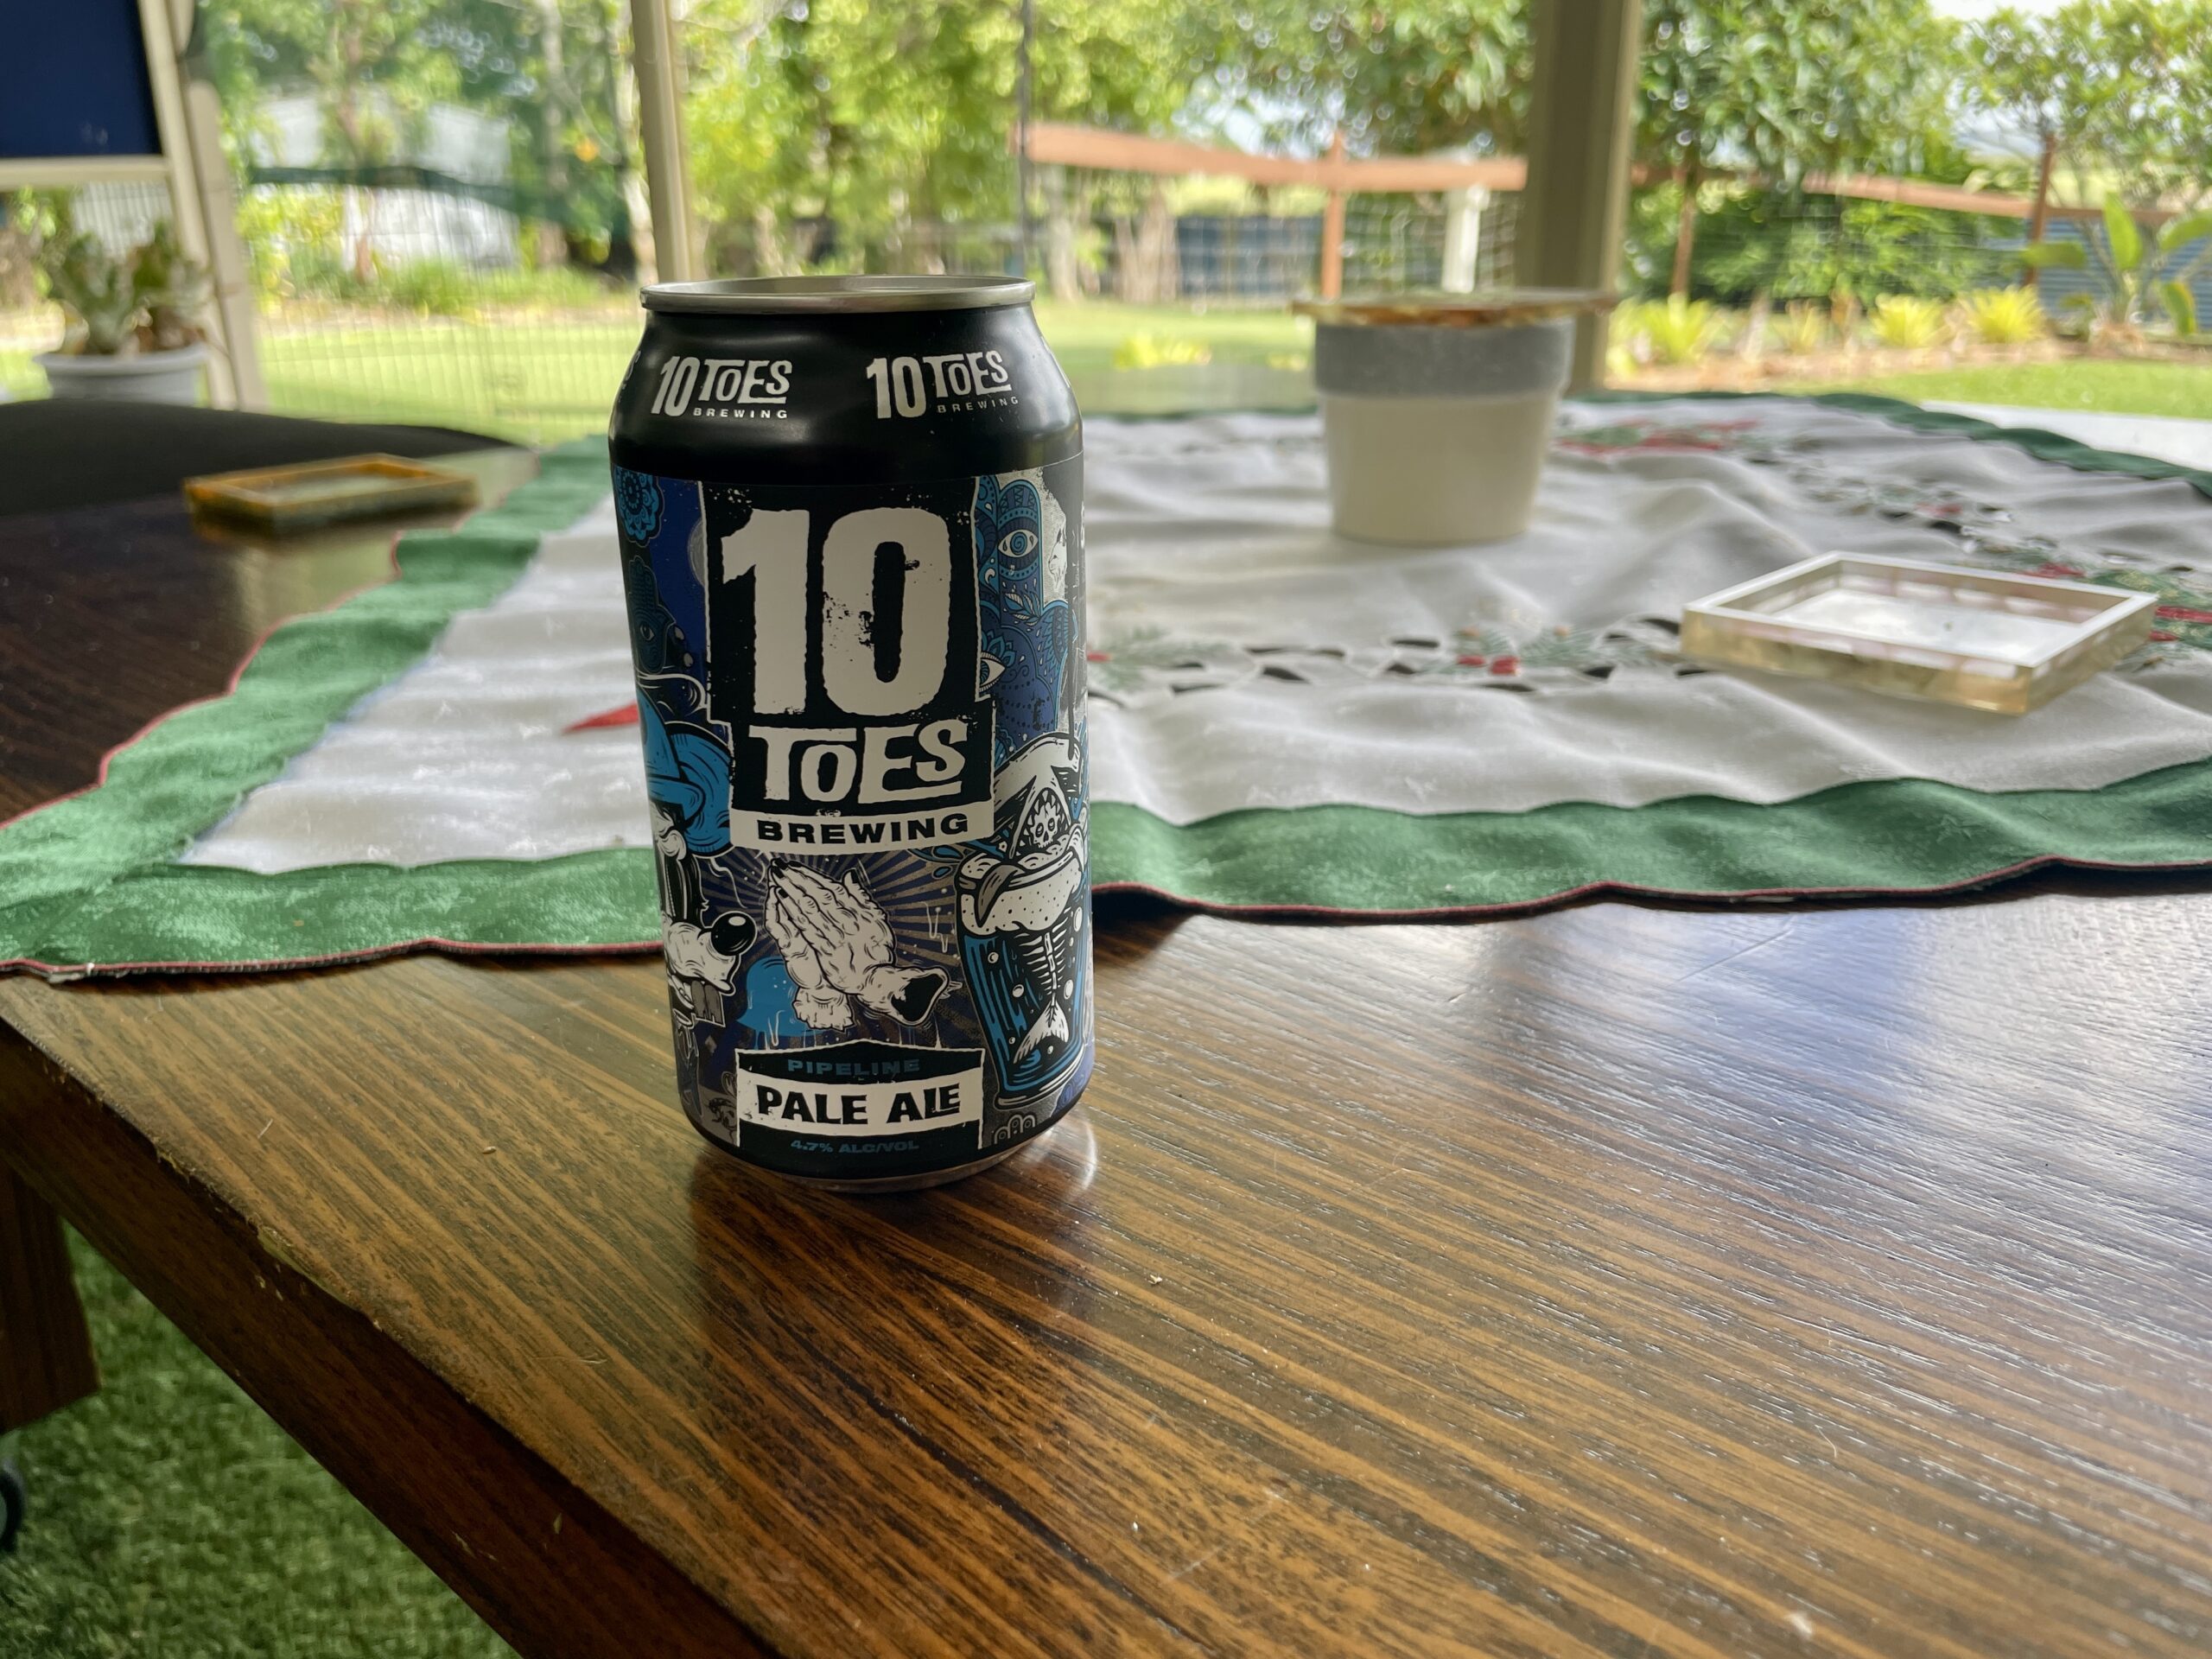 10 Toes beer can